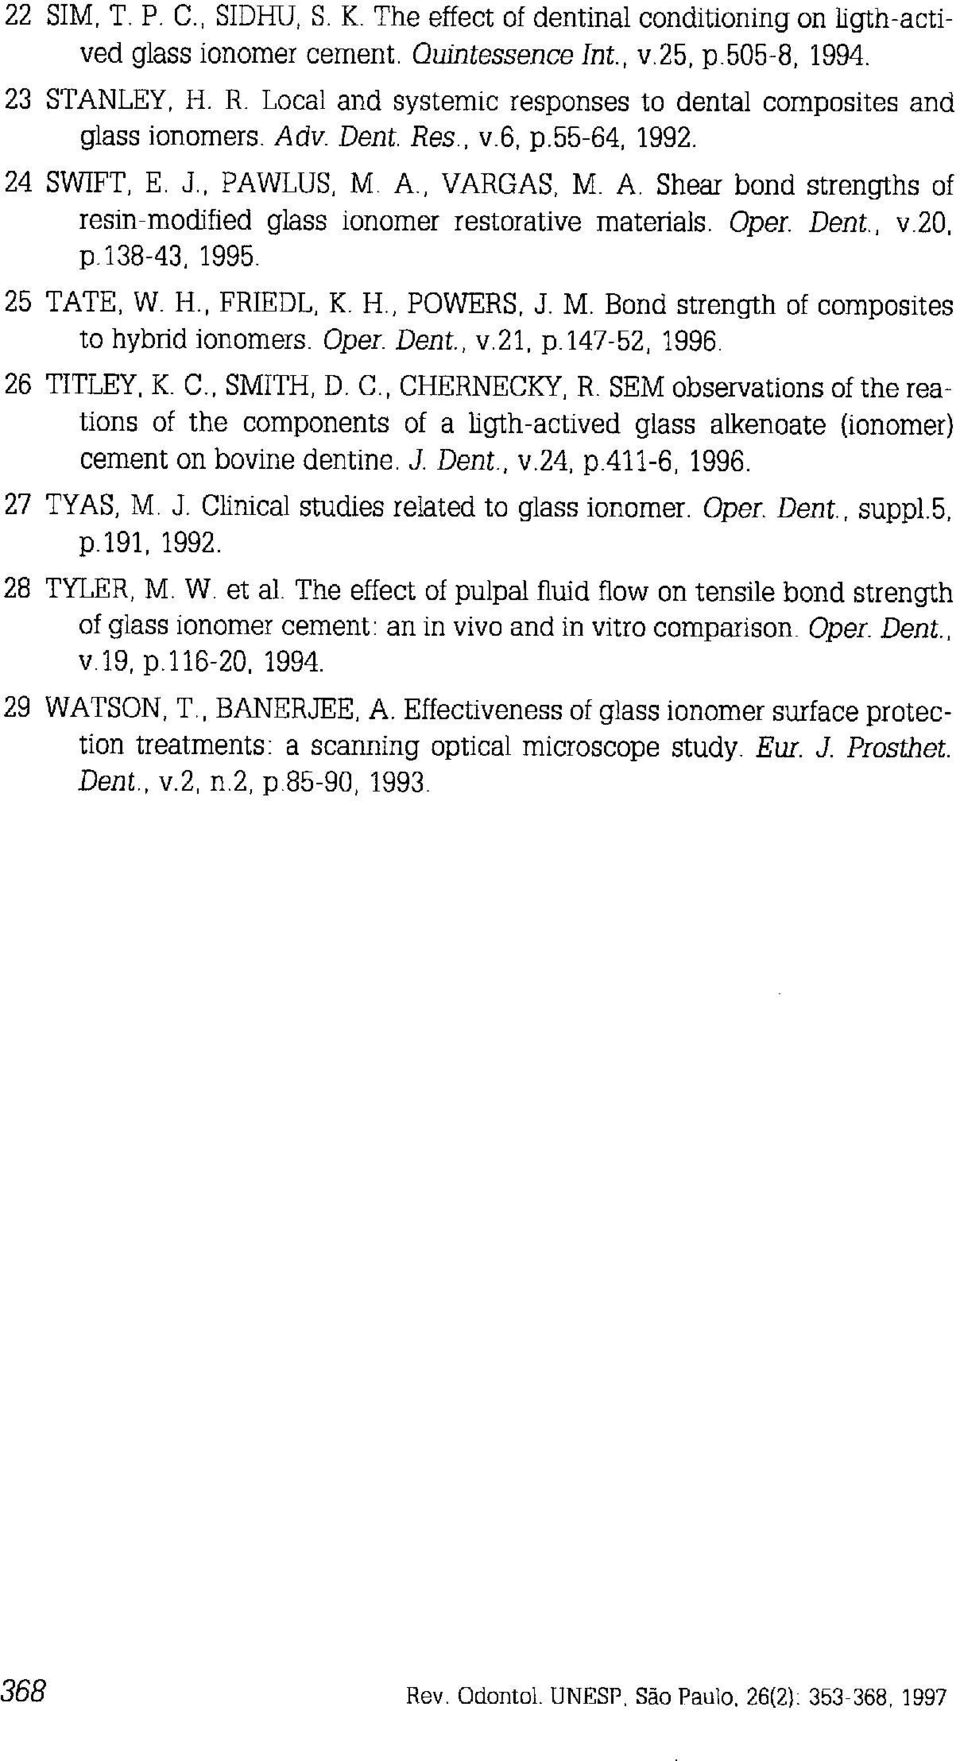 Oper. Dent., v.20, p. 138-43, 1995. 25 TATE, W. H., FRIEDL, K. H., POWERS, J. M. Bond strength of composites to hybrid ionomers. Oper. Dent., v.21, p. 147-52, 1996. 26 TITLEY, K. C., SMITH, D. C., CHERNECKY, R.